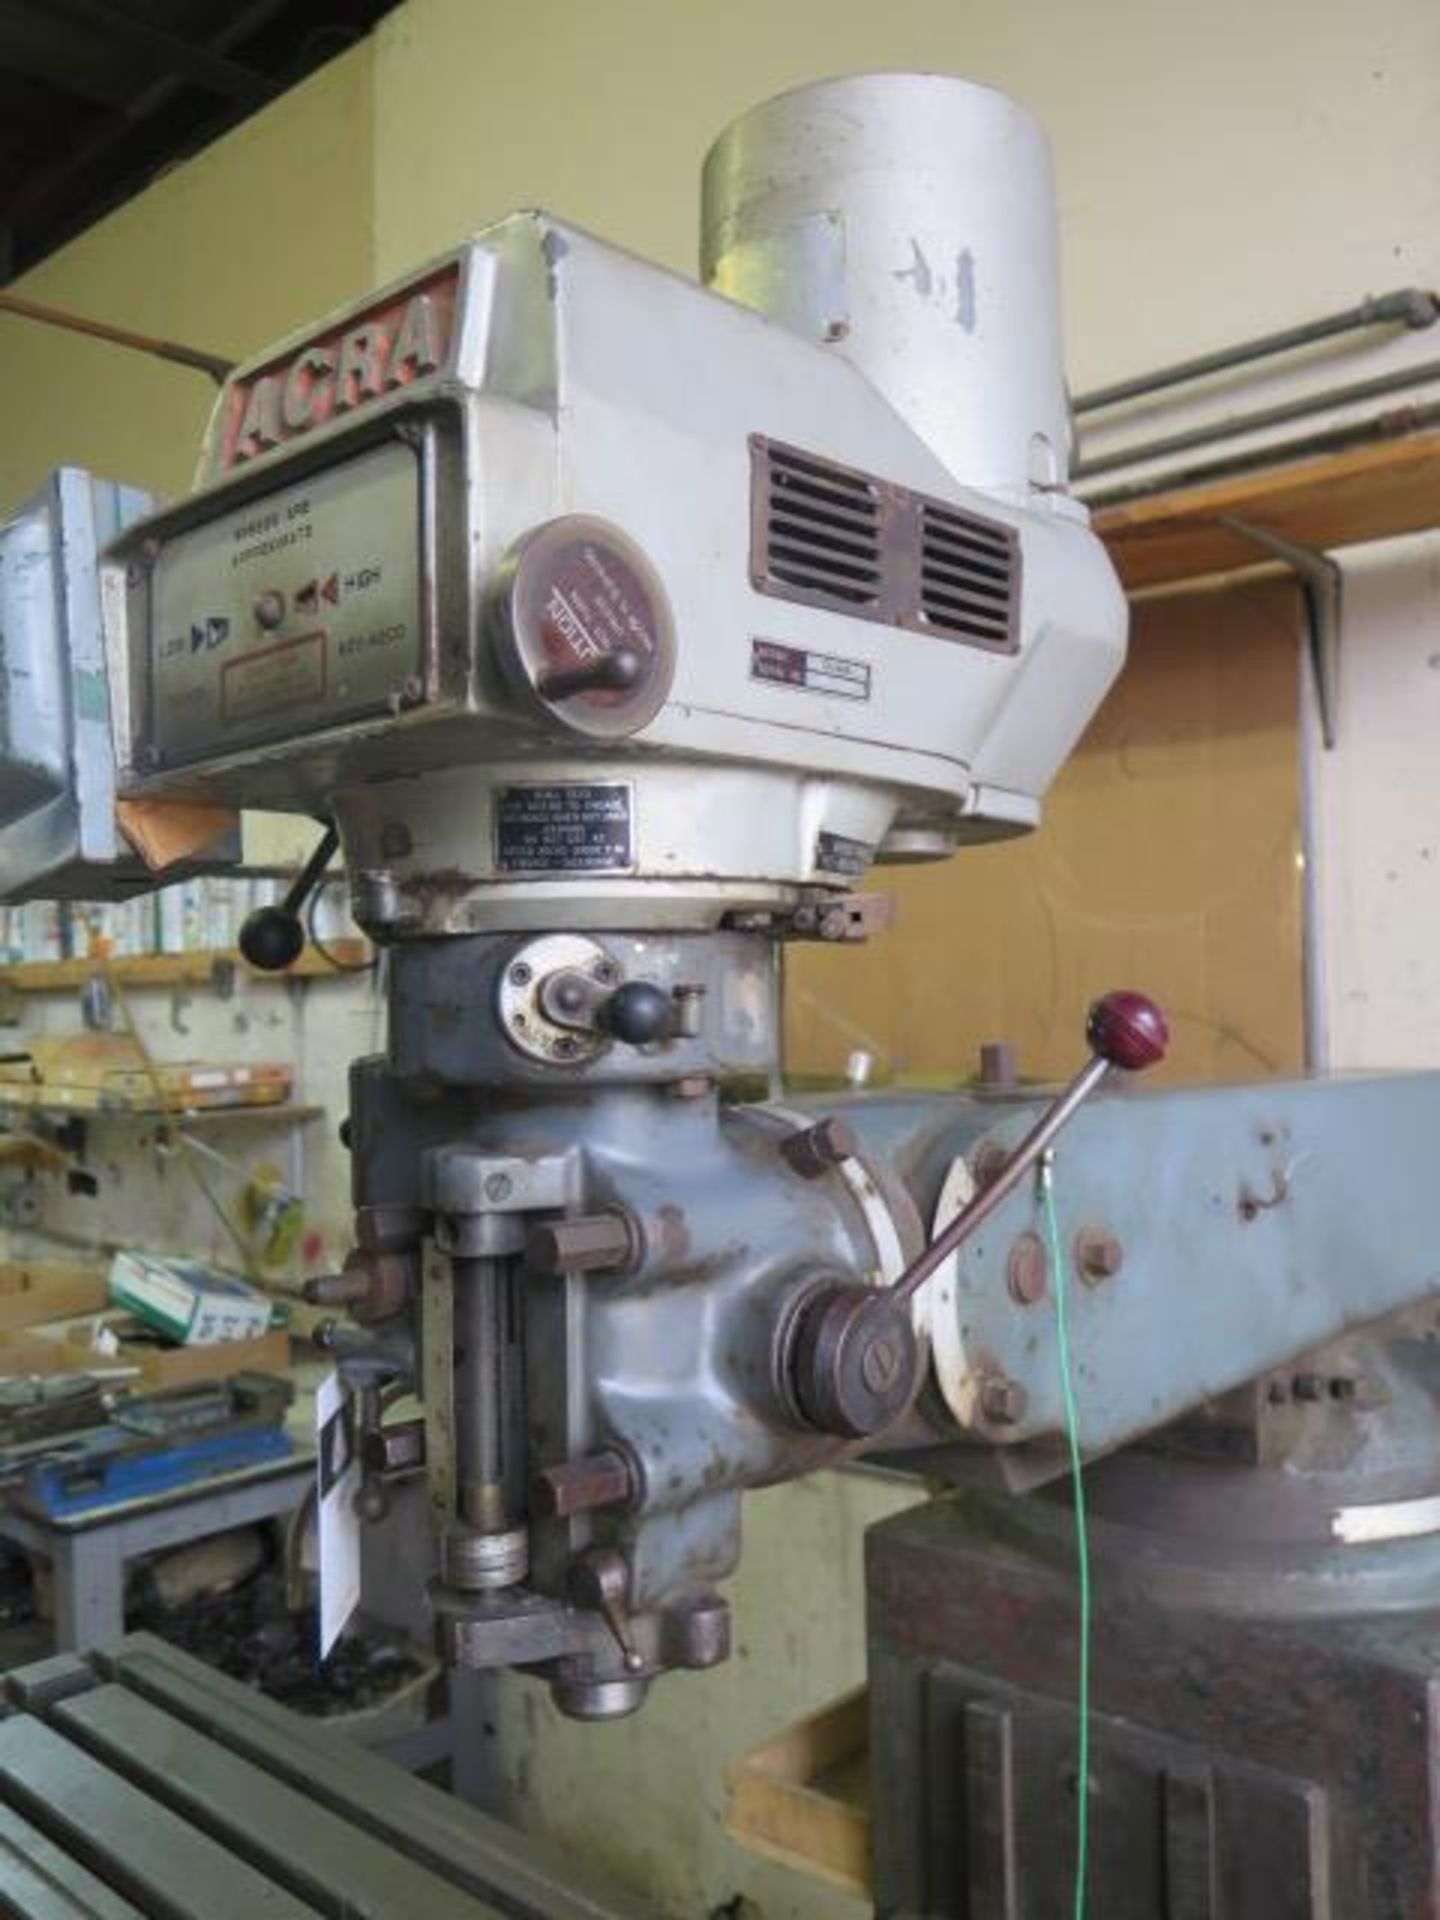 Acra CK4-HK Vertical Mill s/n 771319 w/ 70-4200 RPM, R8 Spindle, Box Ways, 10” x 54”, SOLD AS IS - Image 4 of 11